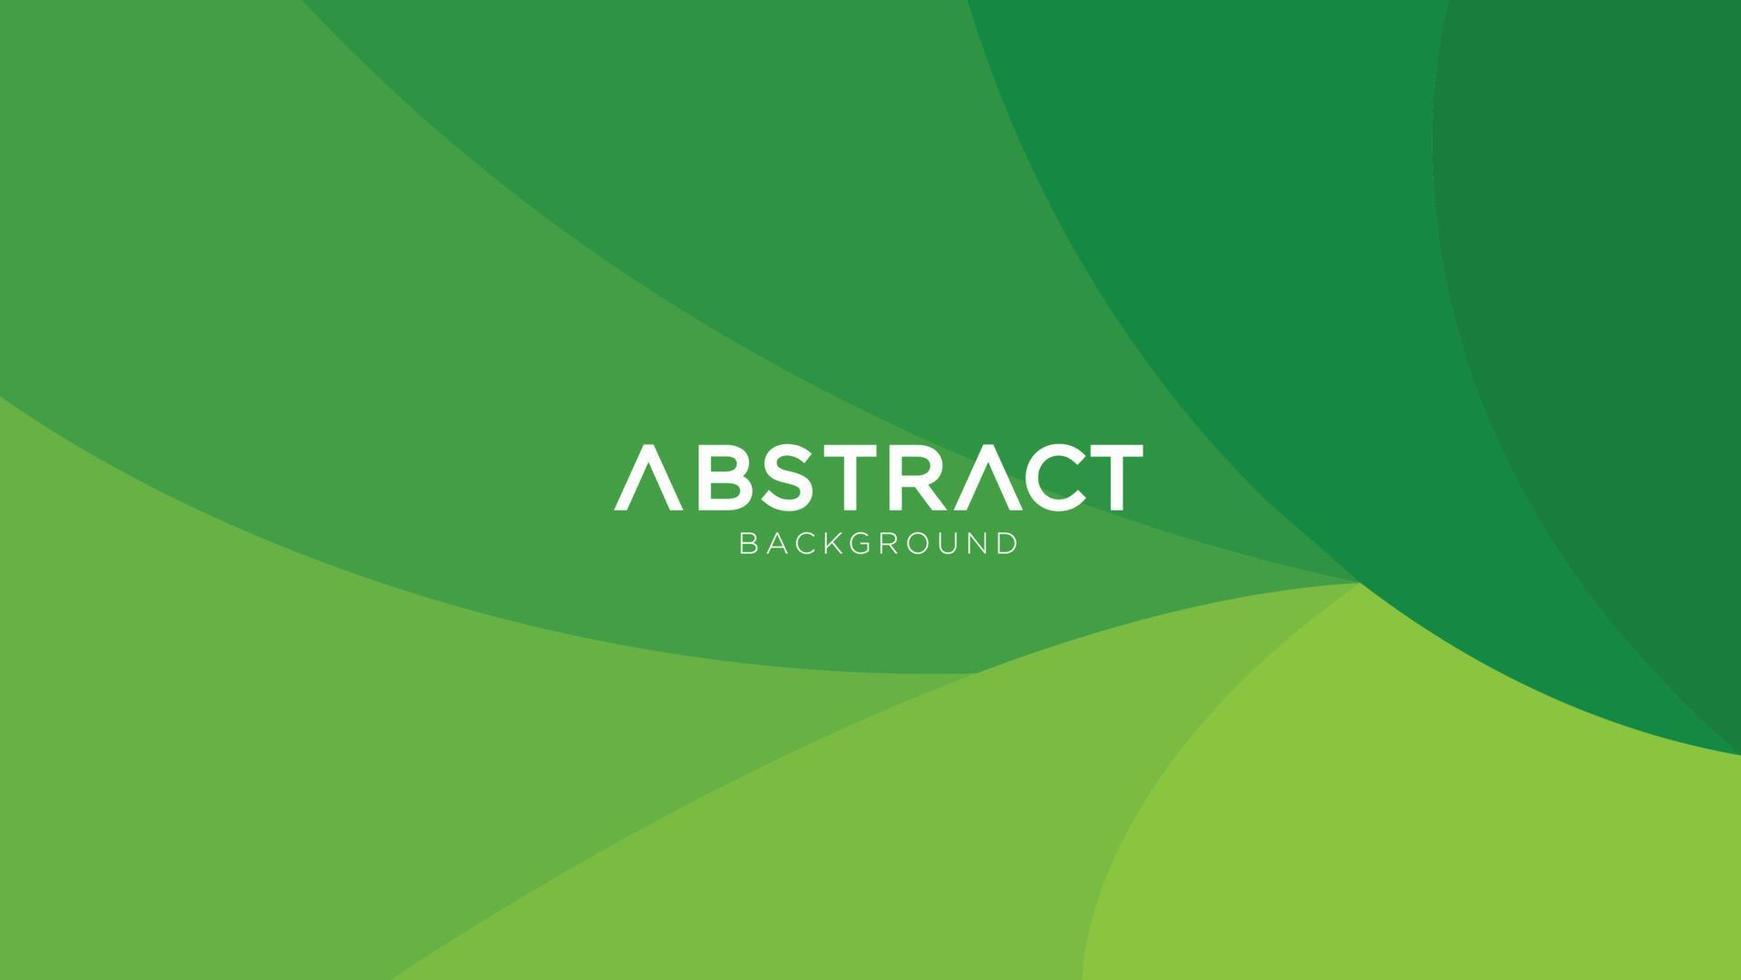 Vector green abstract background design. Abstract green background design